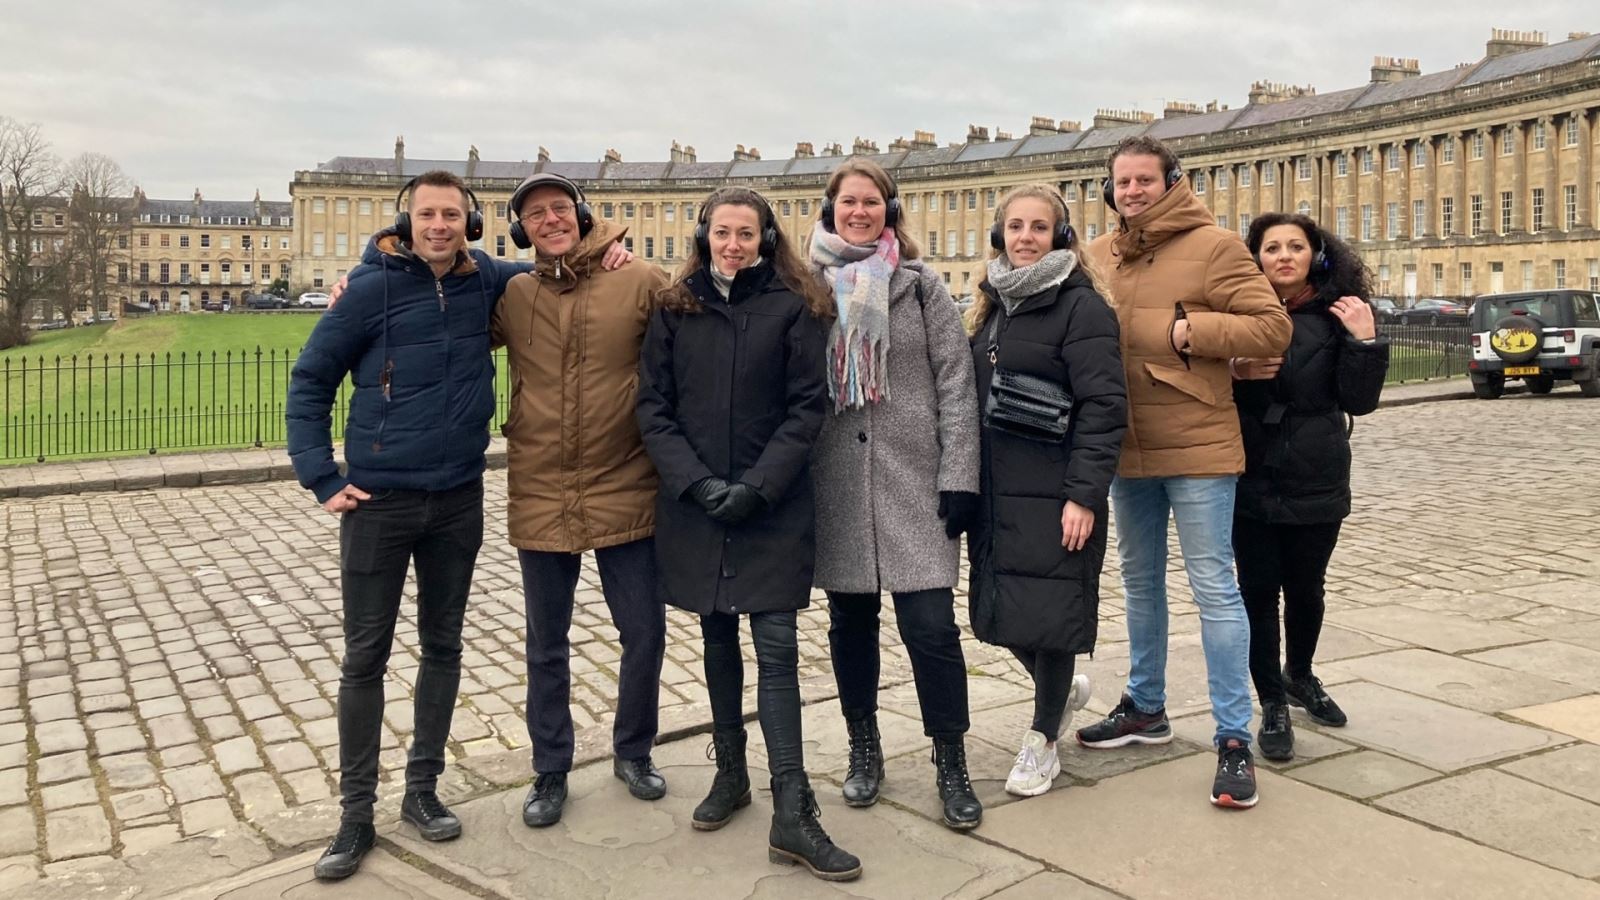 Travel trade buyers on a fam trip in Bath